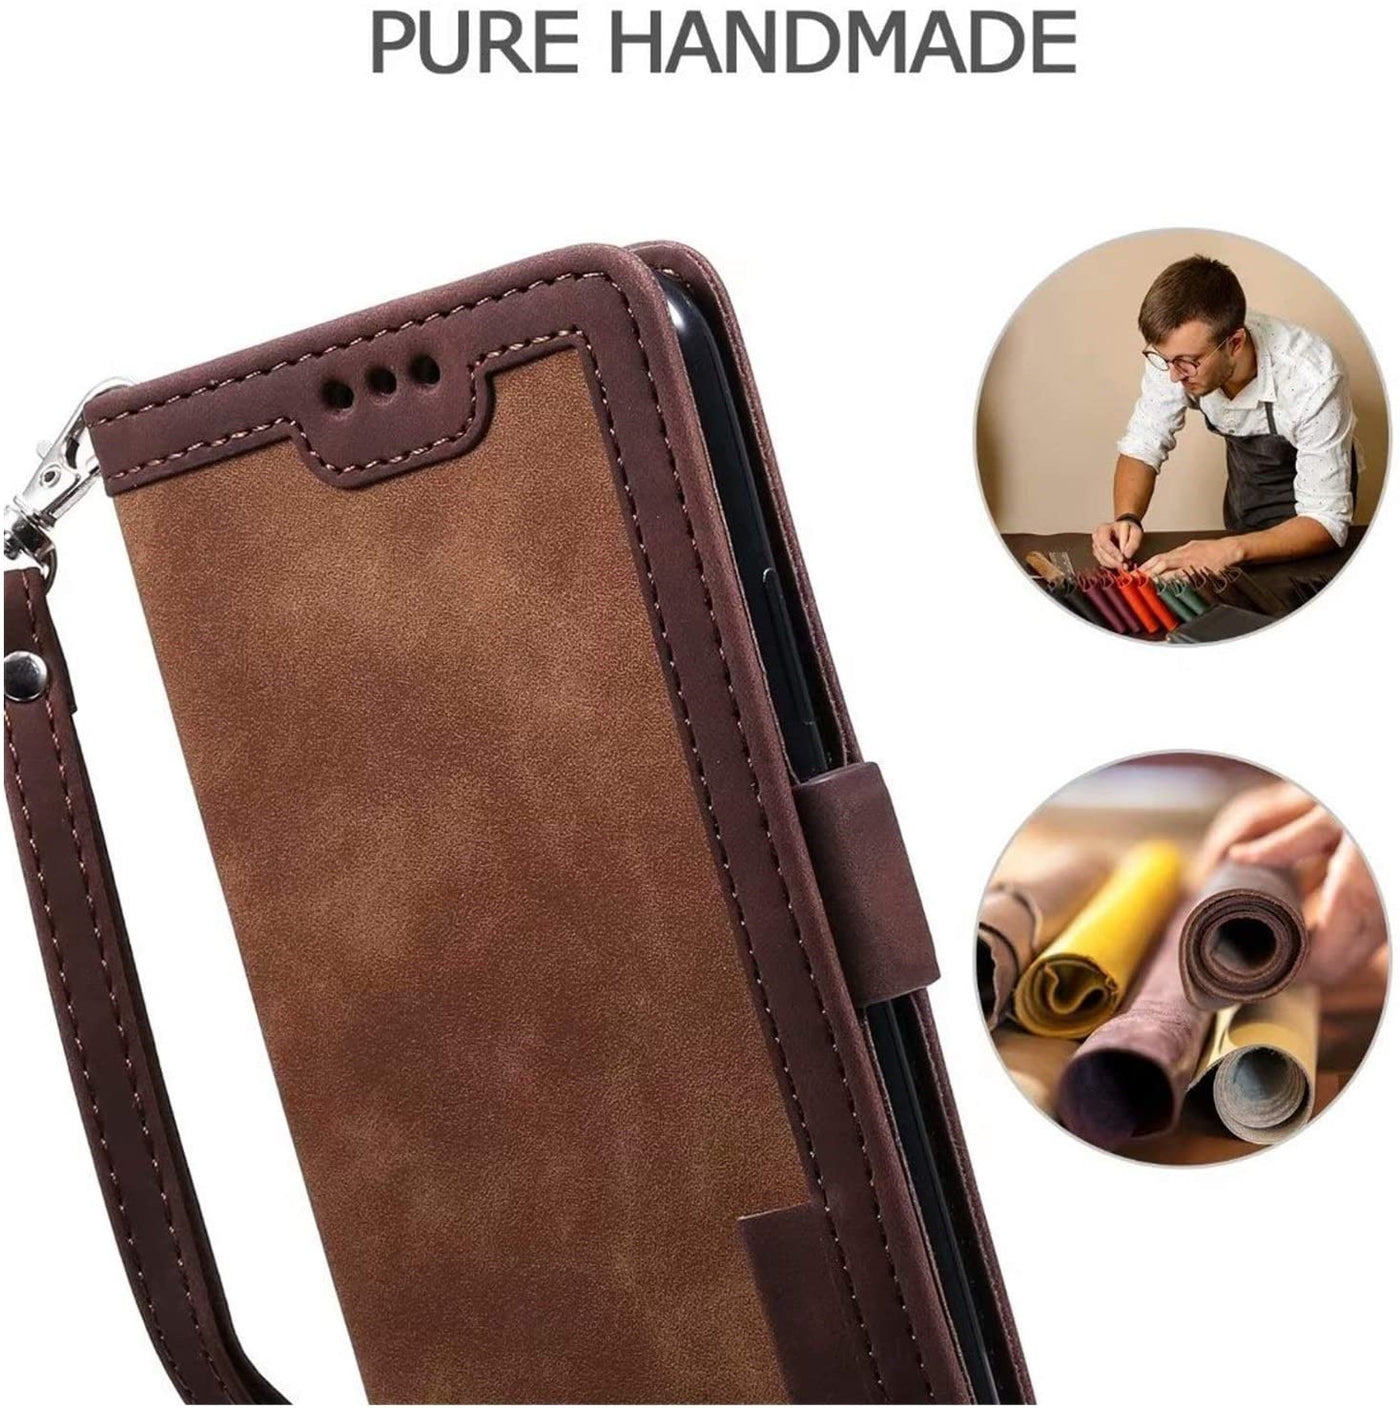 Apple iPhone 11 leather case cover with camera protection